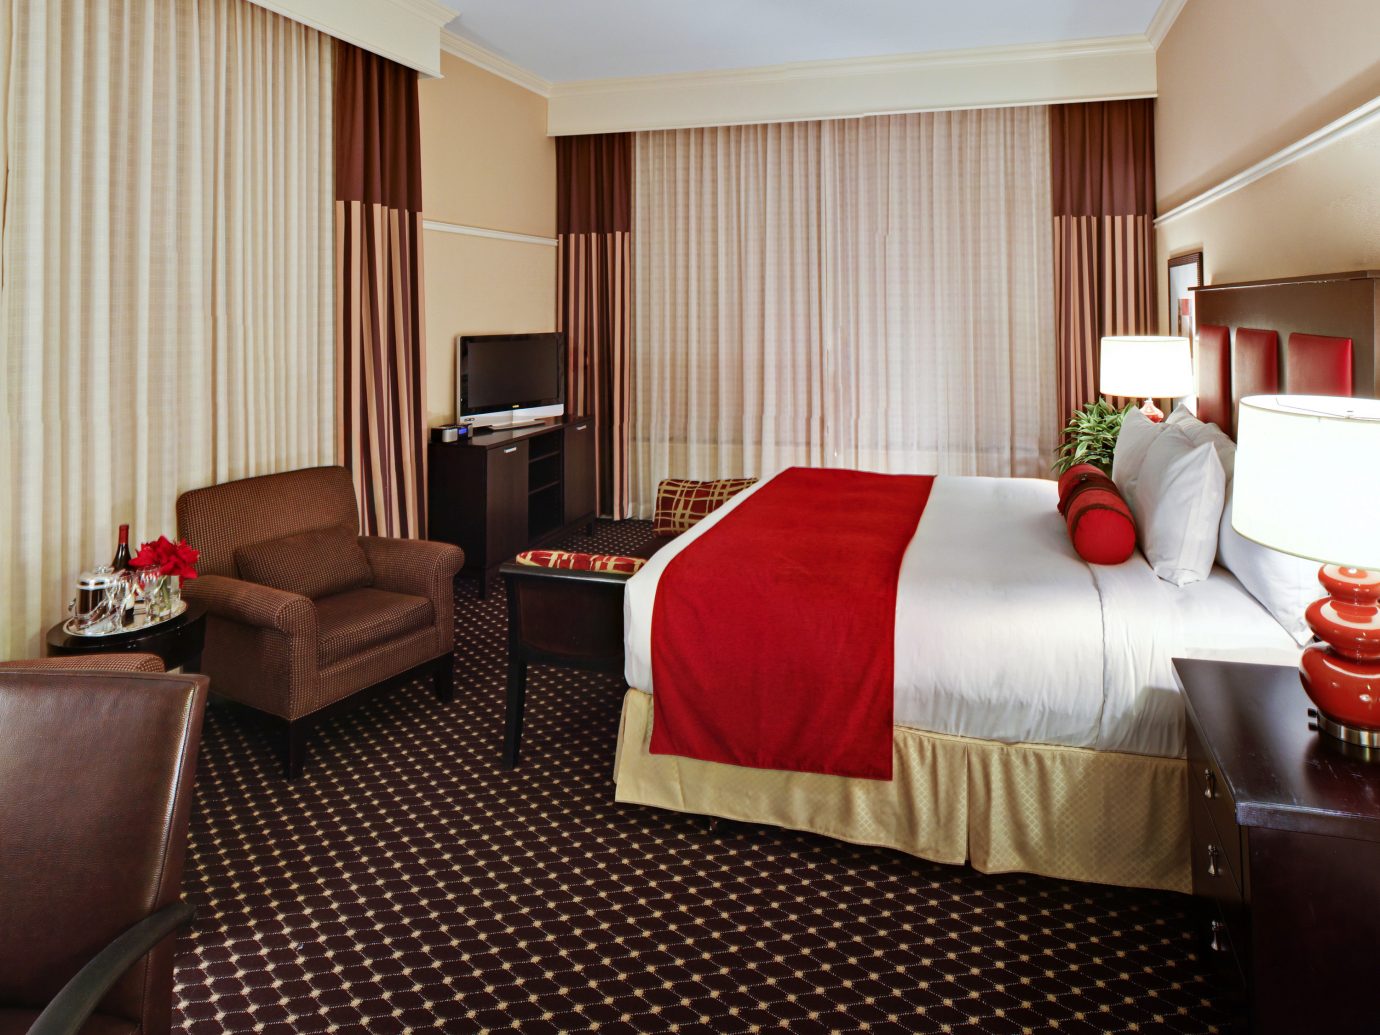 suite interior with red accents at Hotel Blake